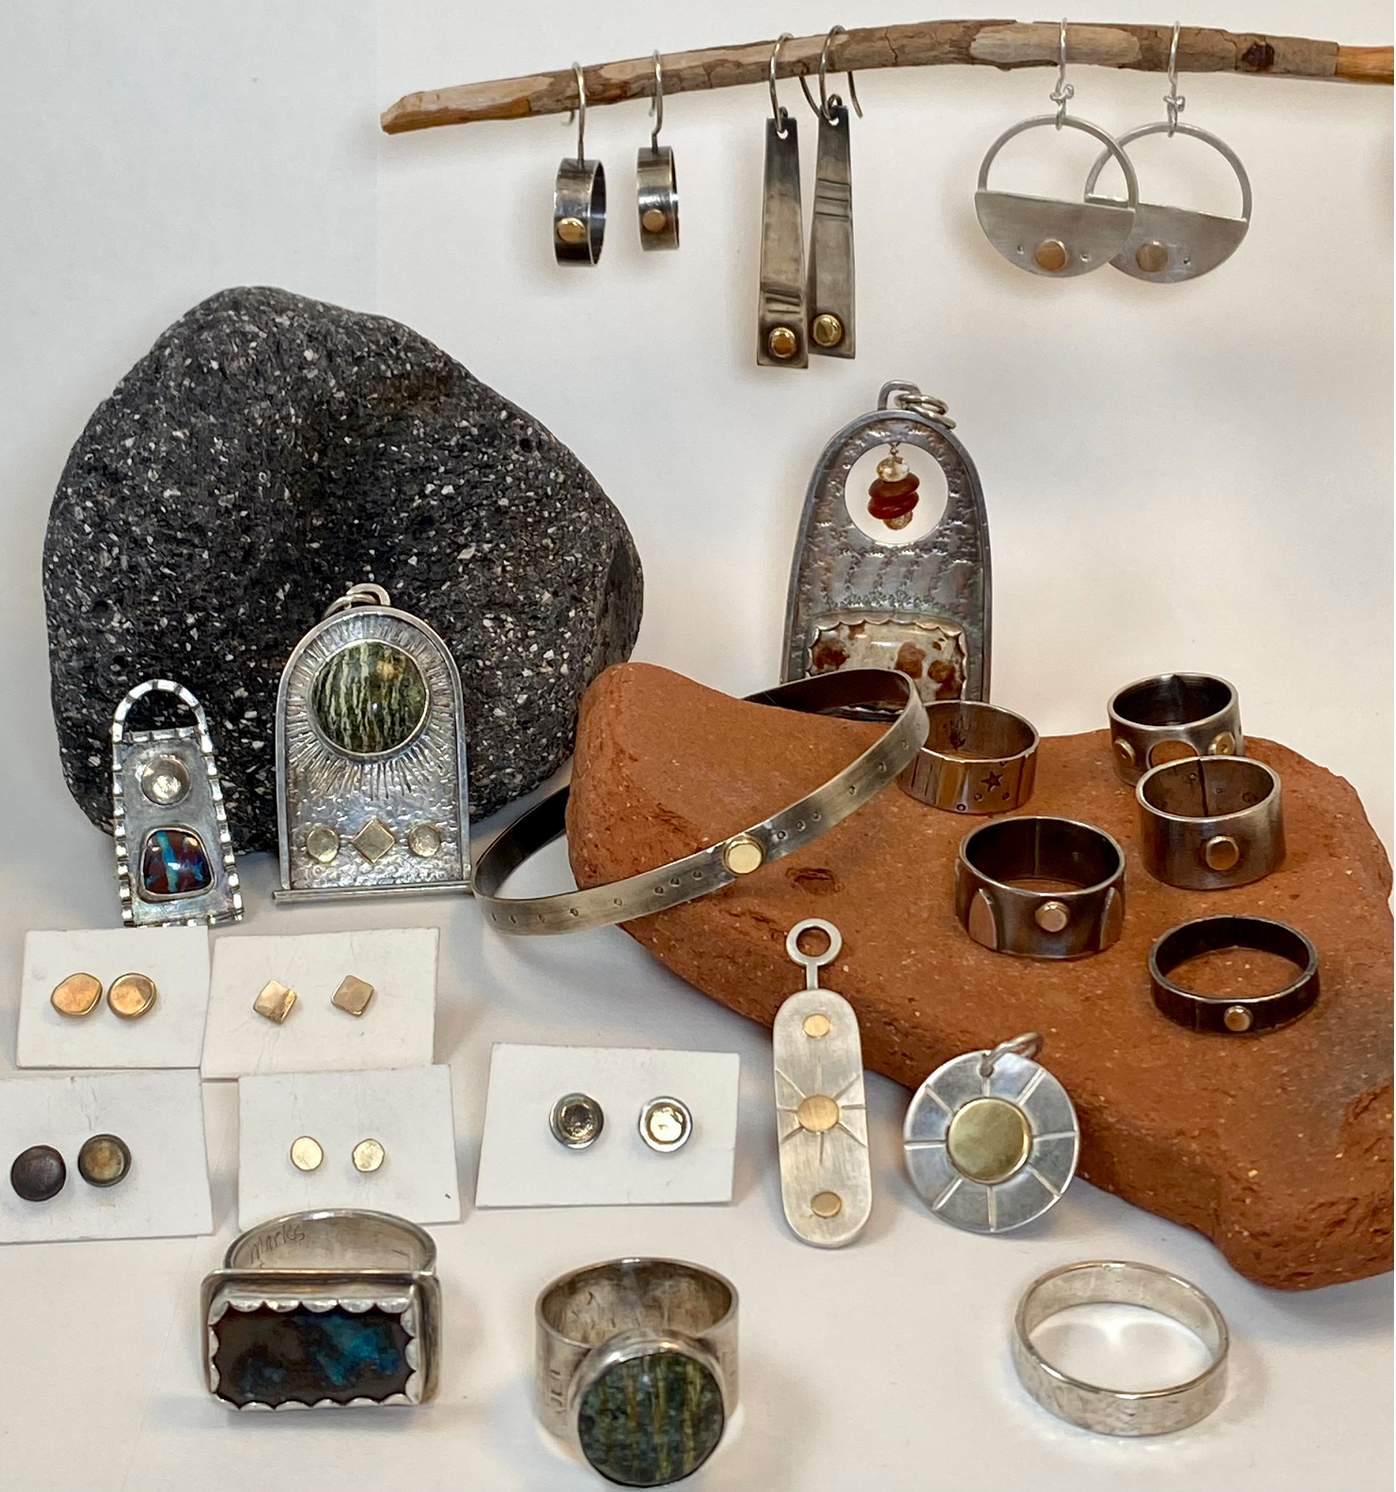 jewelry collection - silver and gold, gold discs with stones, boulder opals; earrings, ring, pendant, necklace, studs, bracelet